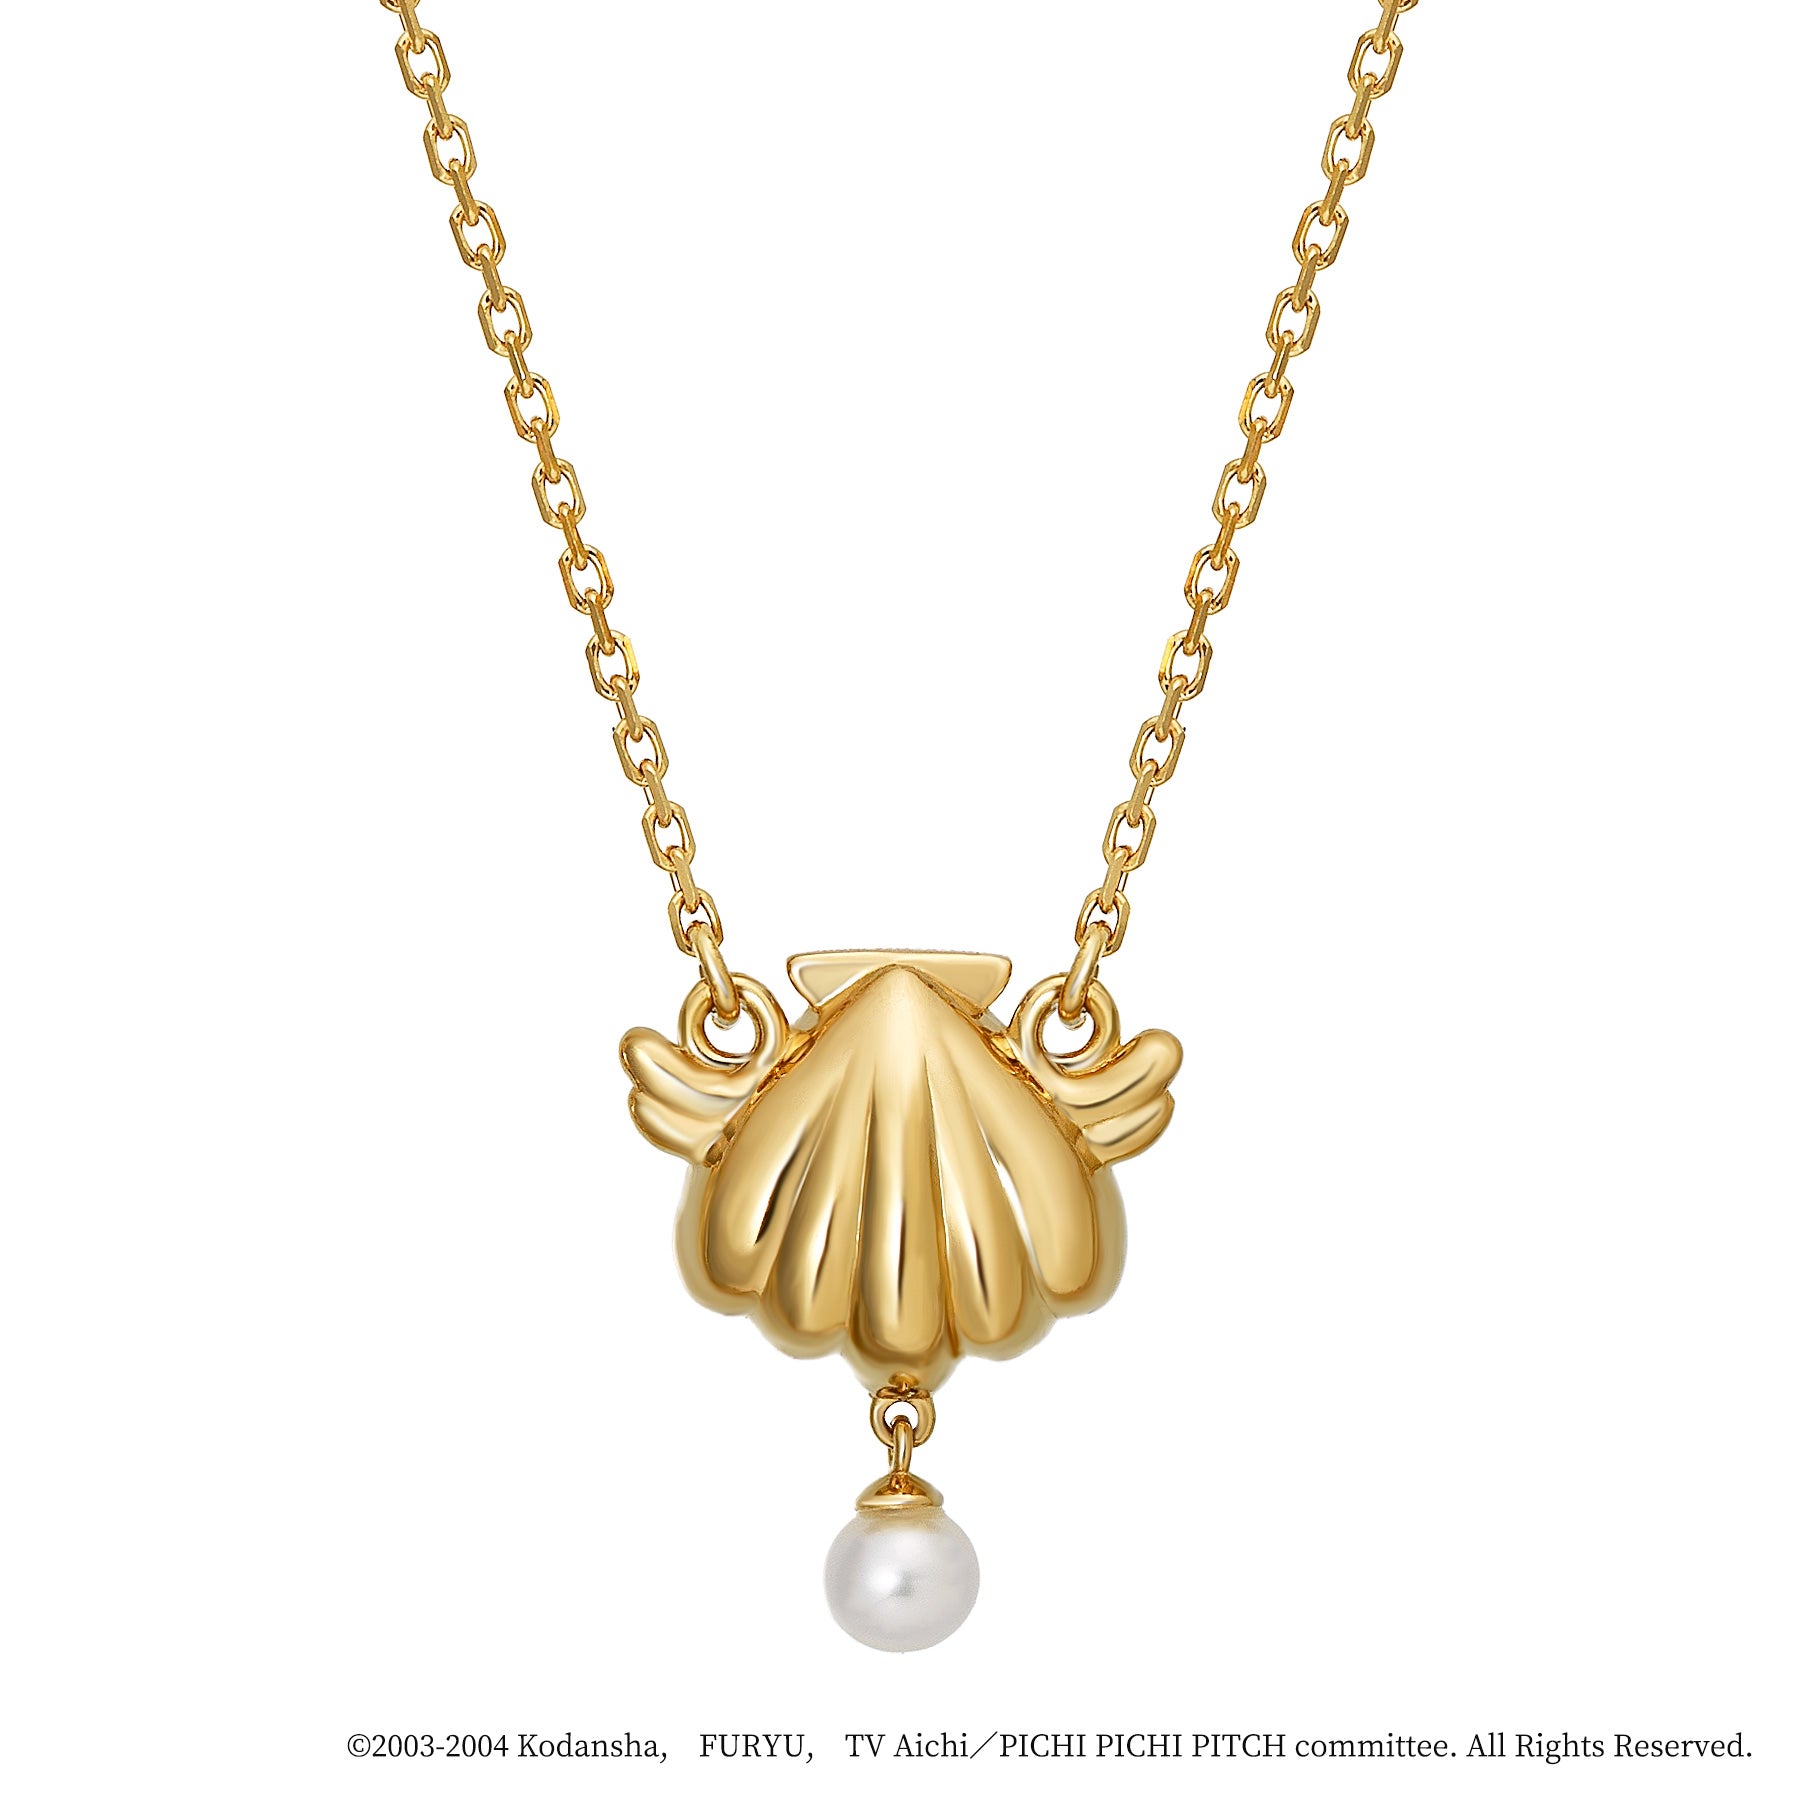 Mermaid Melody Pichi Pichi Pitch - Reversible Necklace (Hanon Hosho) - Product Image